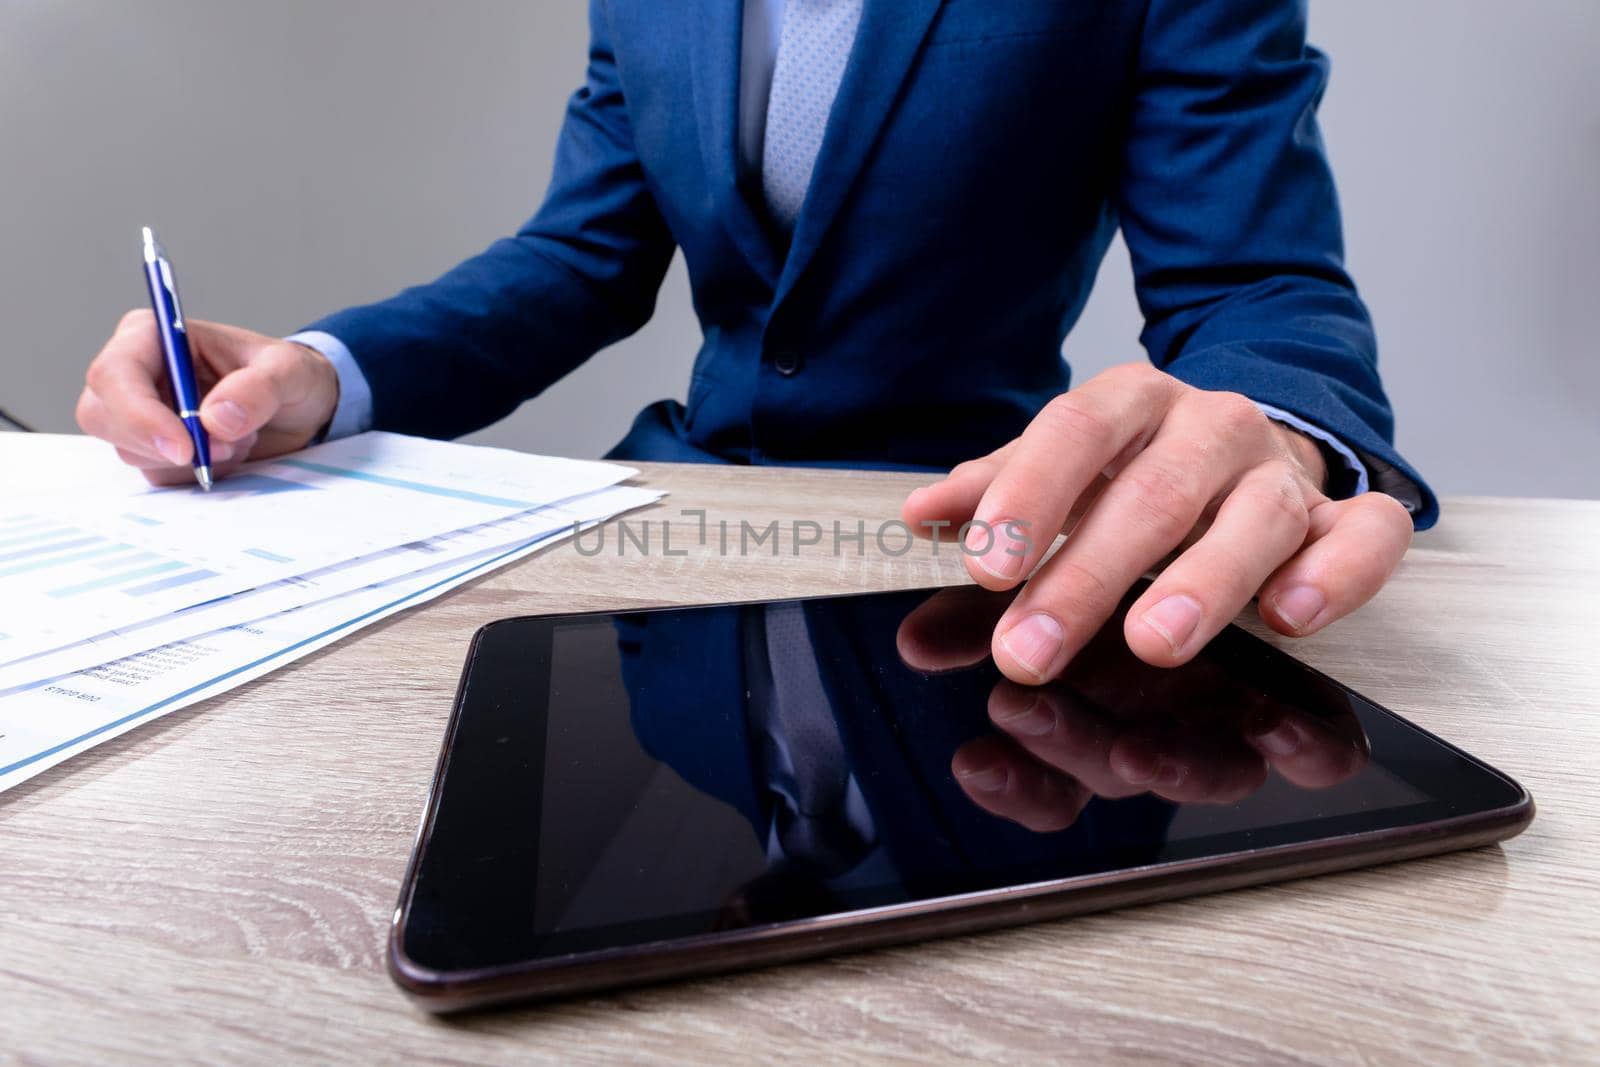 Midsection of caucasian businessman using tablet and taking notes, isolated on grey background. business technology, communication and growth concept.